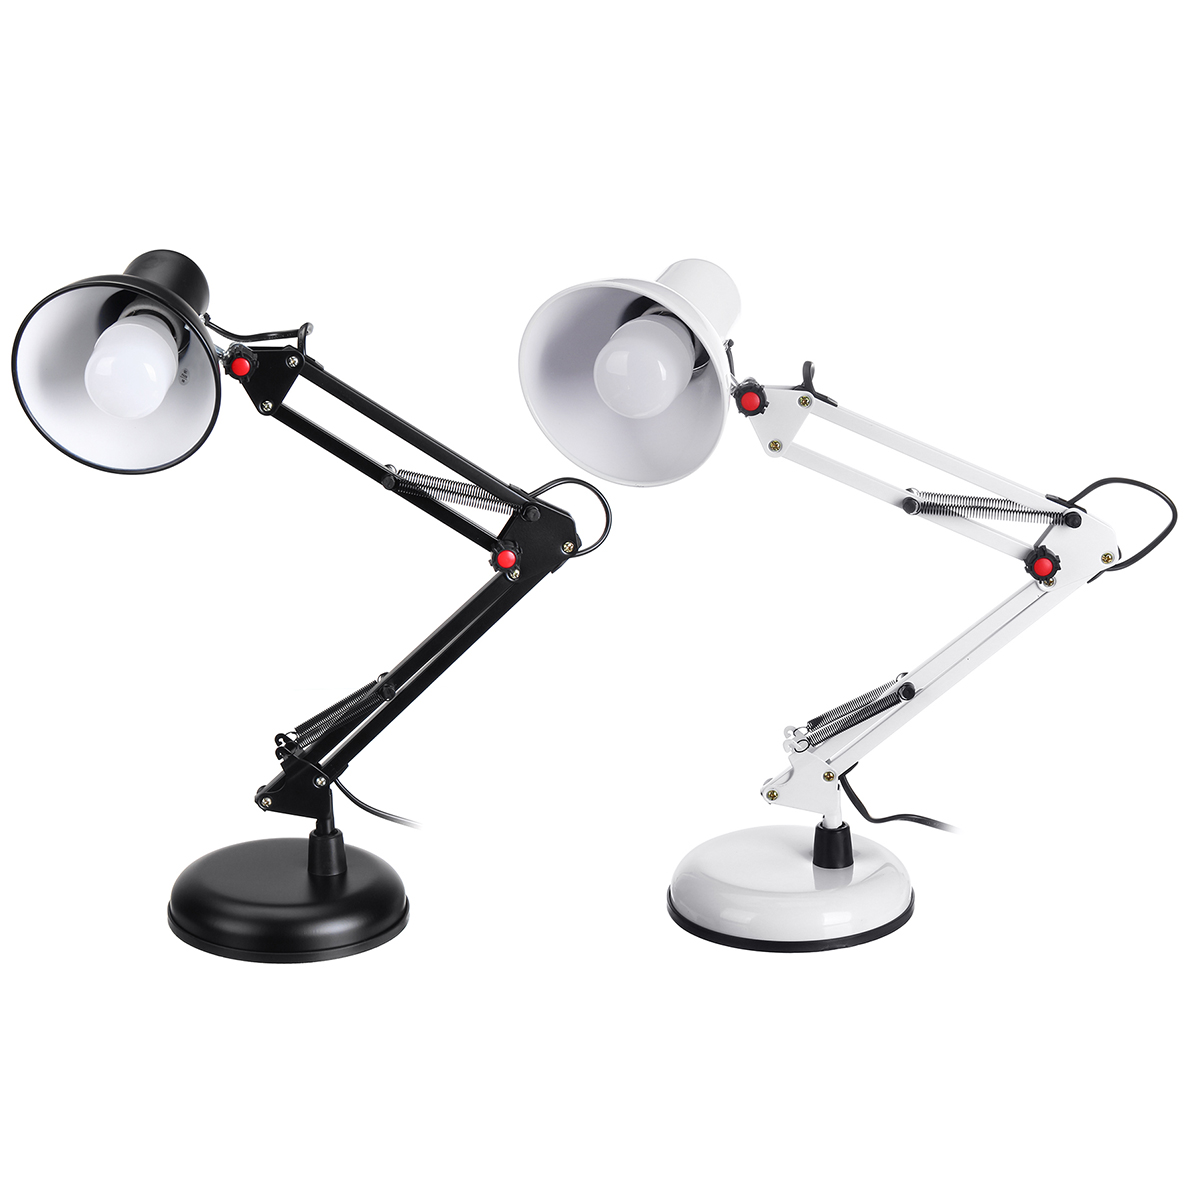 5W-Super-Bright-Swing-Arm-Desk-Lamp-Clamp-on-Table-Light-with-LED-Bulb-Metal-Clip-220V-1742397-9